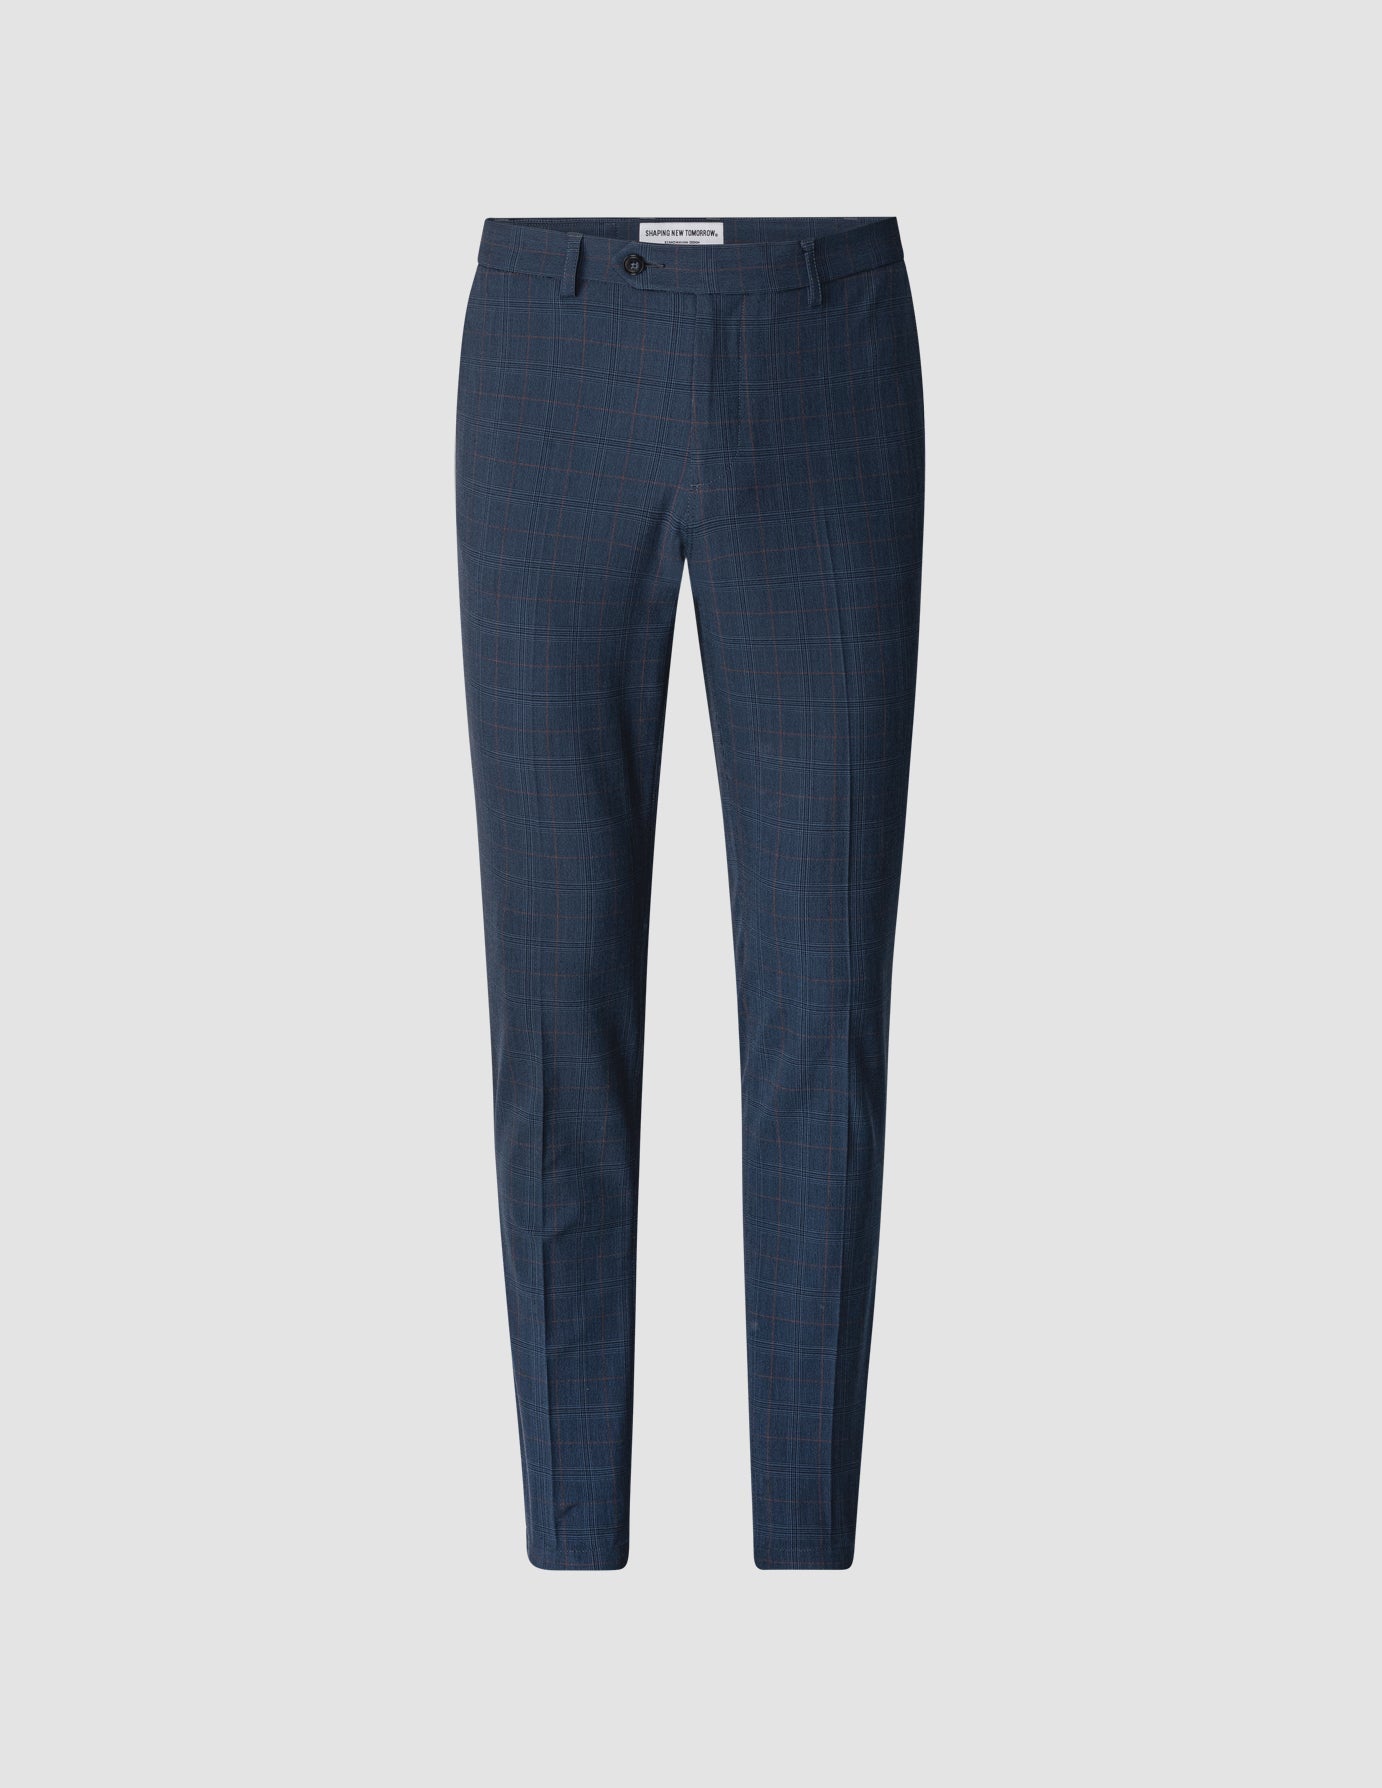 Buy Grey Trousers & Pants for Men by INDEPENDENCE Online | Ajio.com